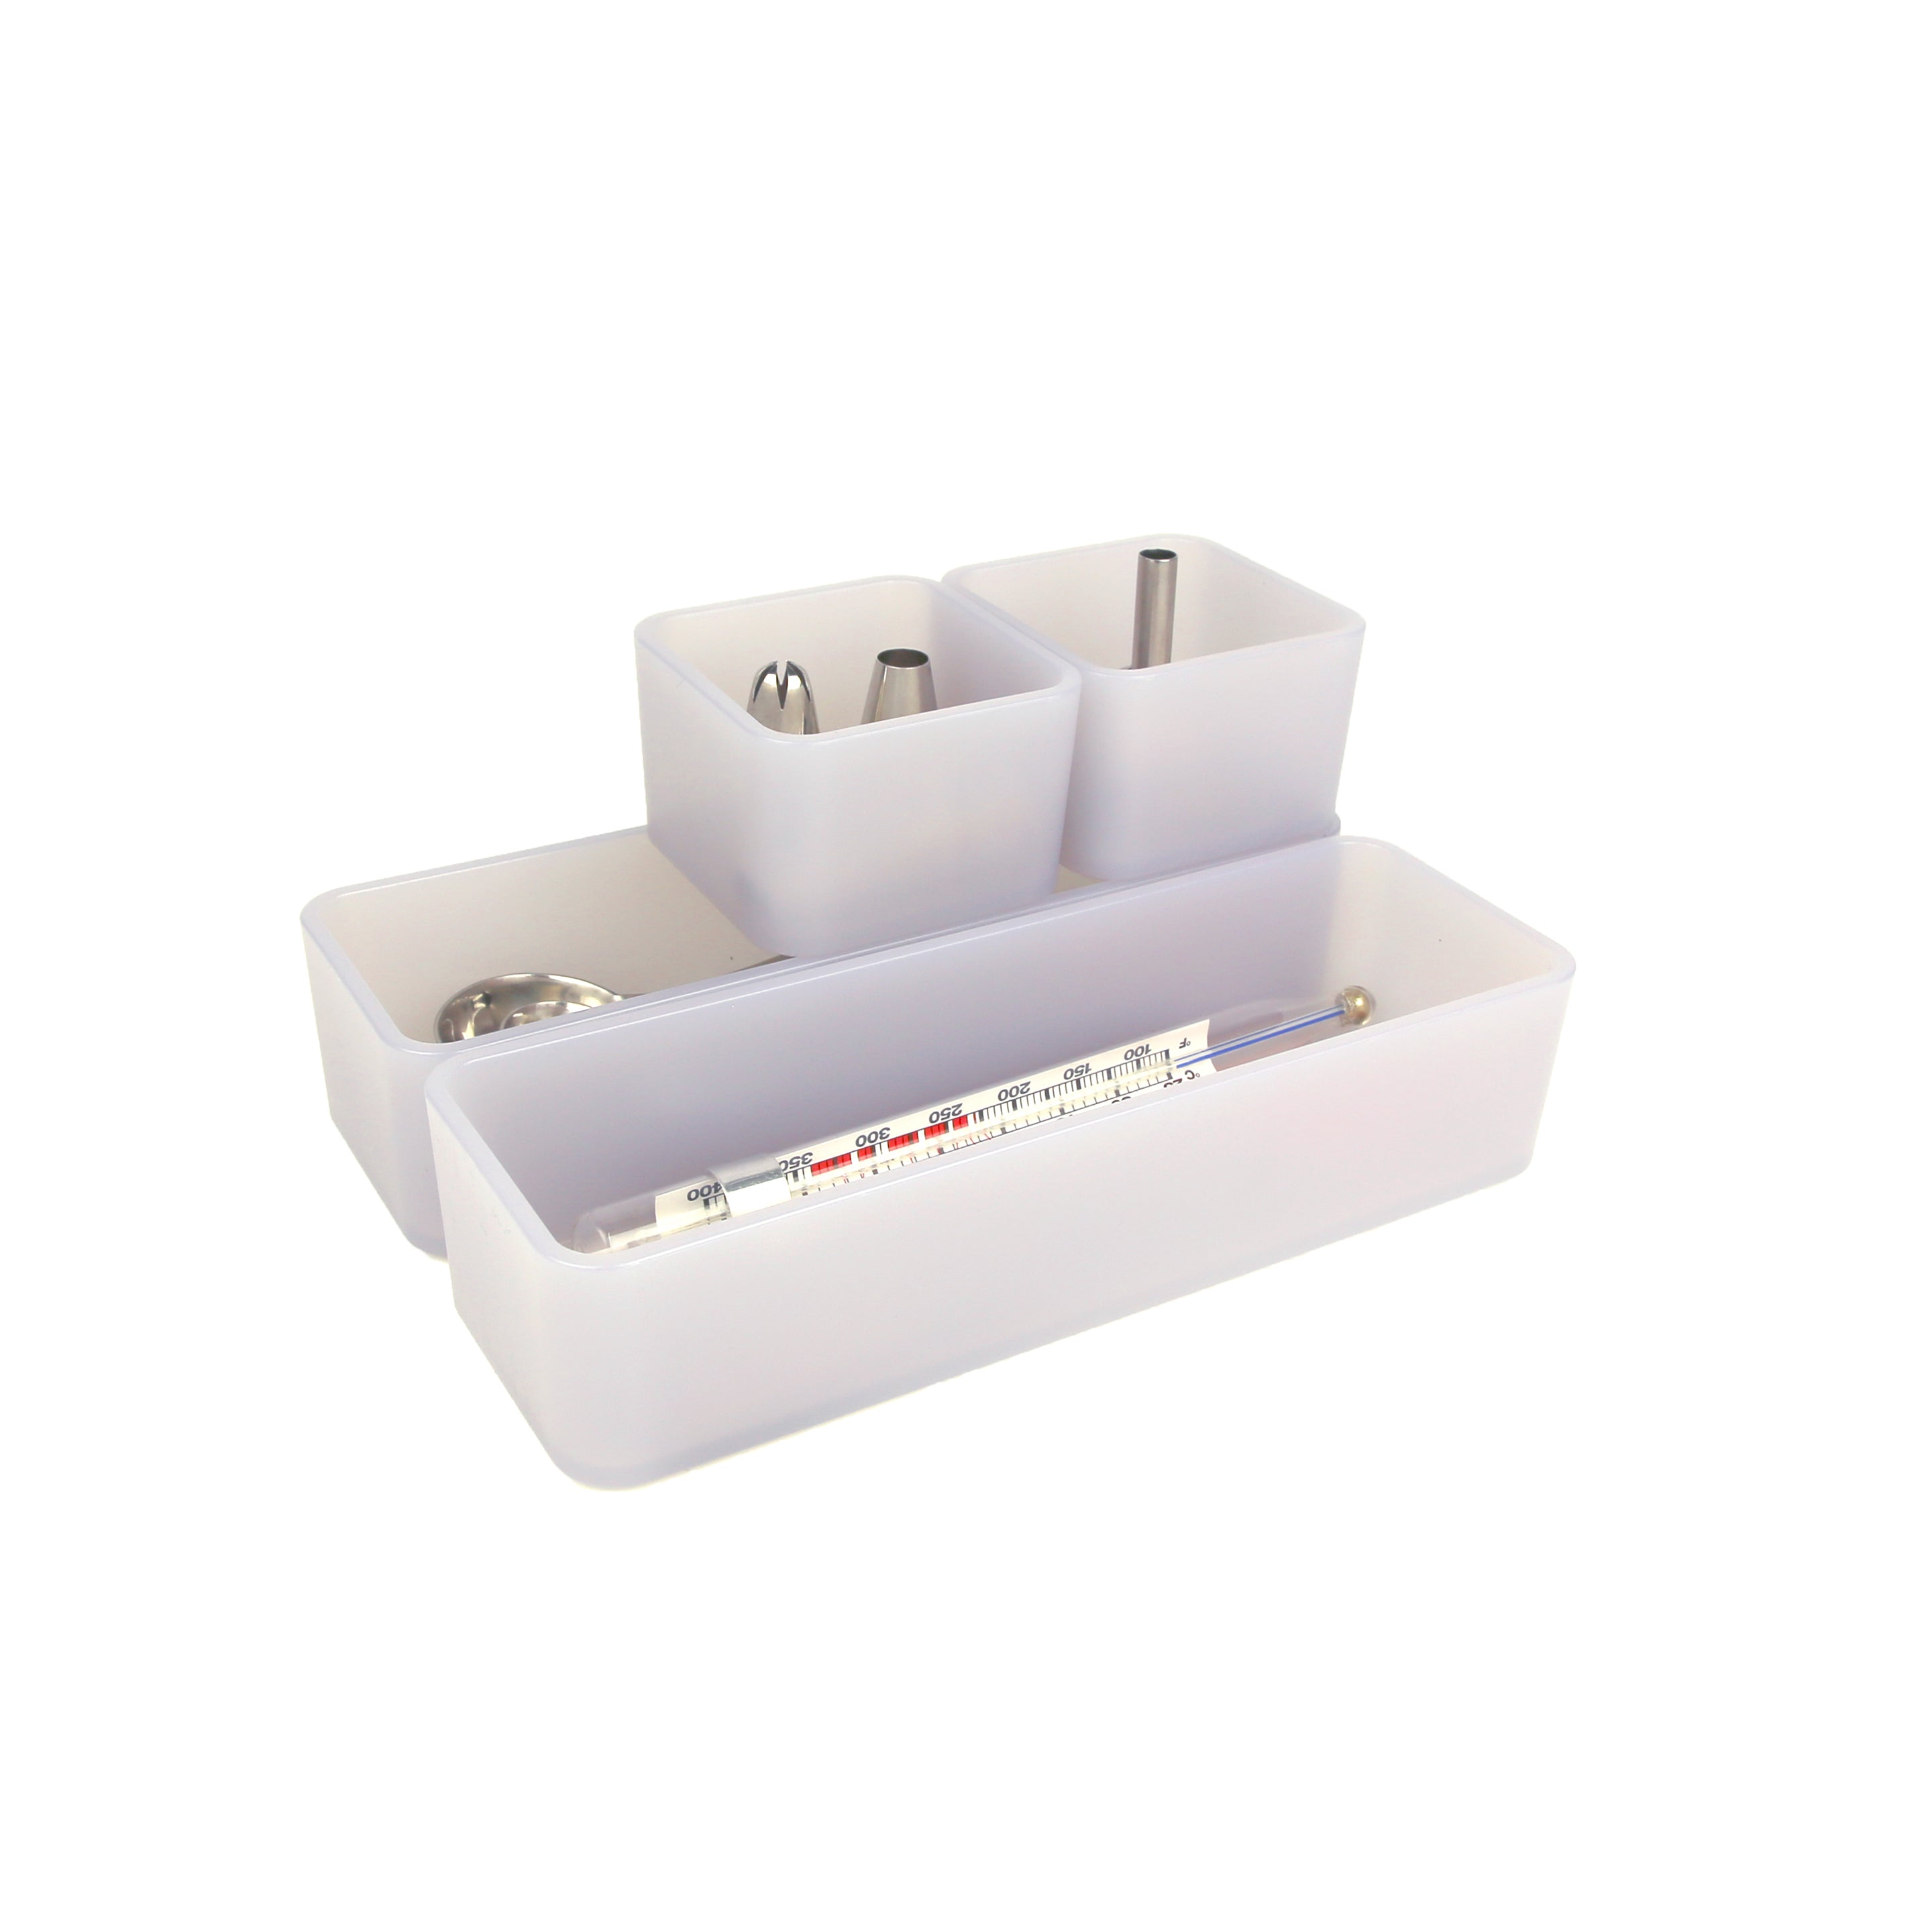 reSTAK recycled stackable organizing bins set of 4